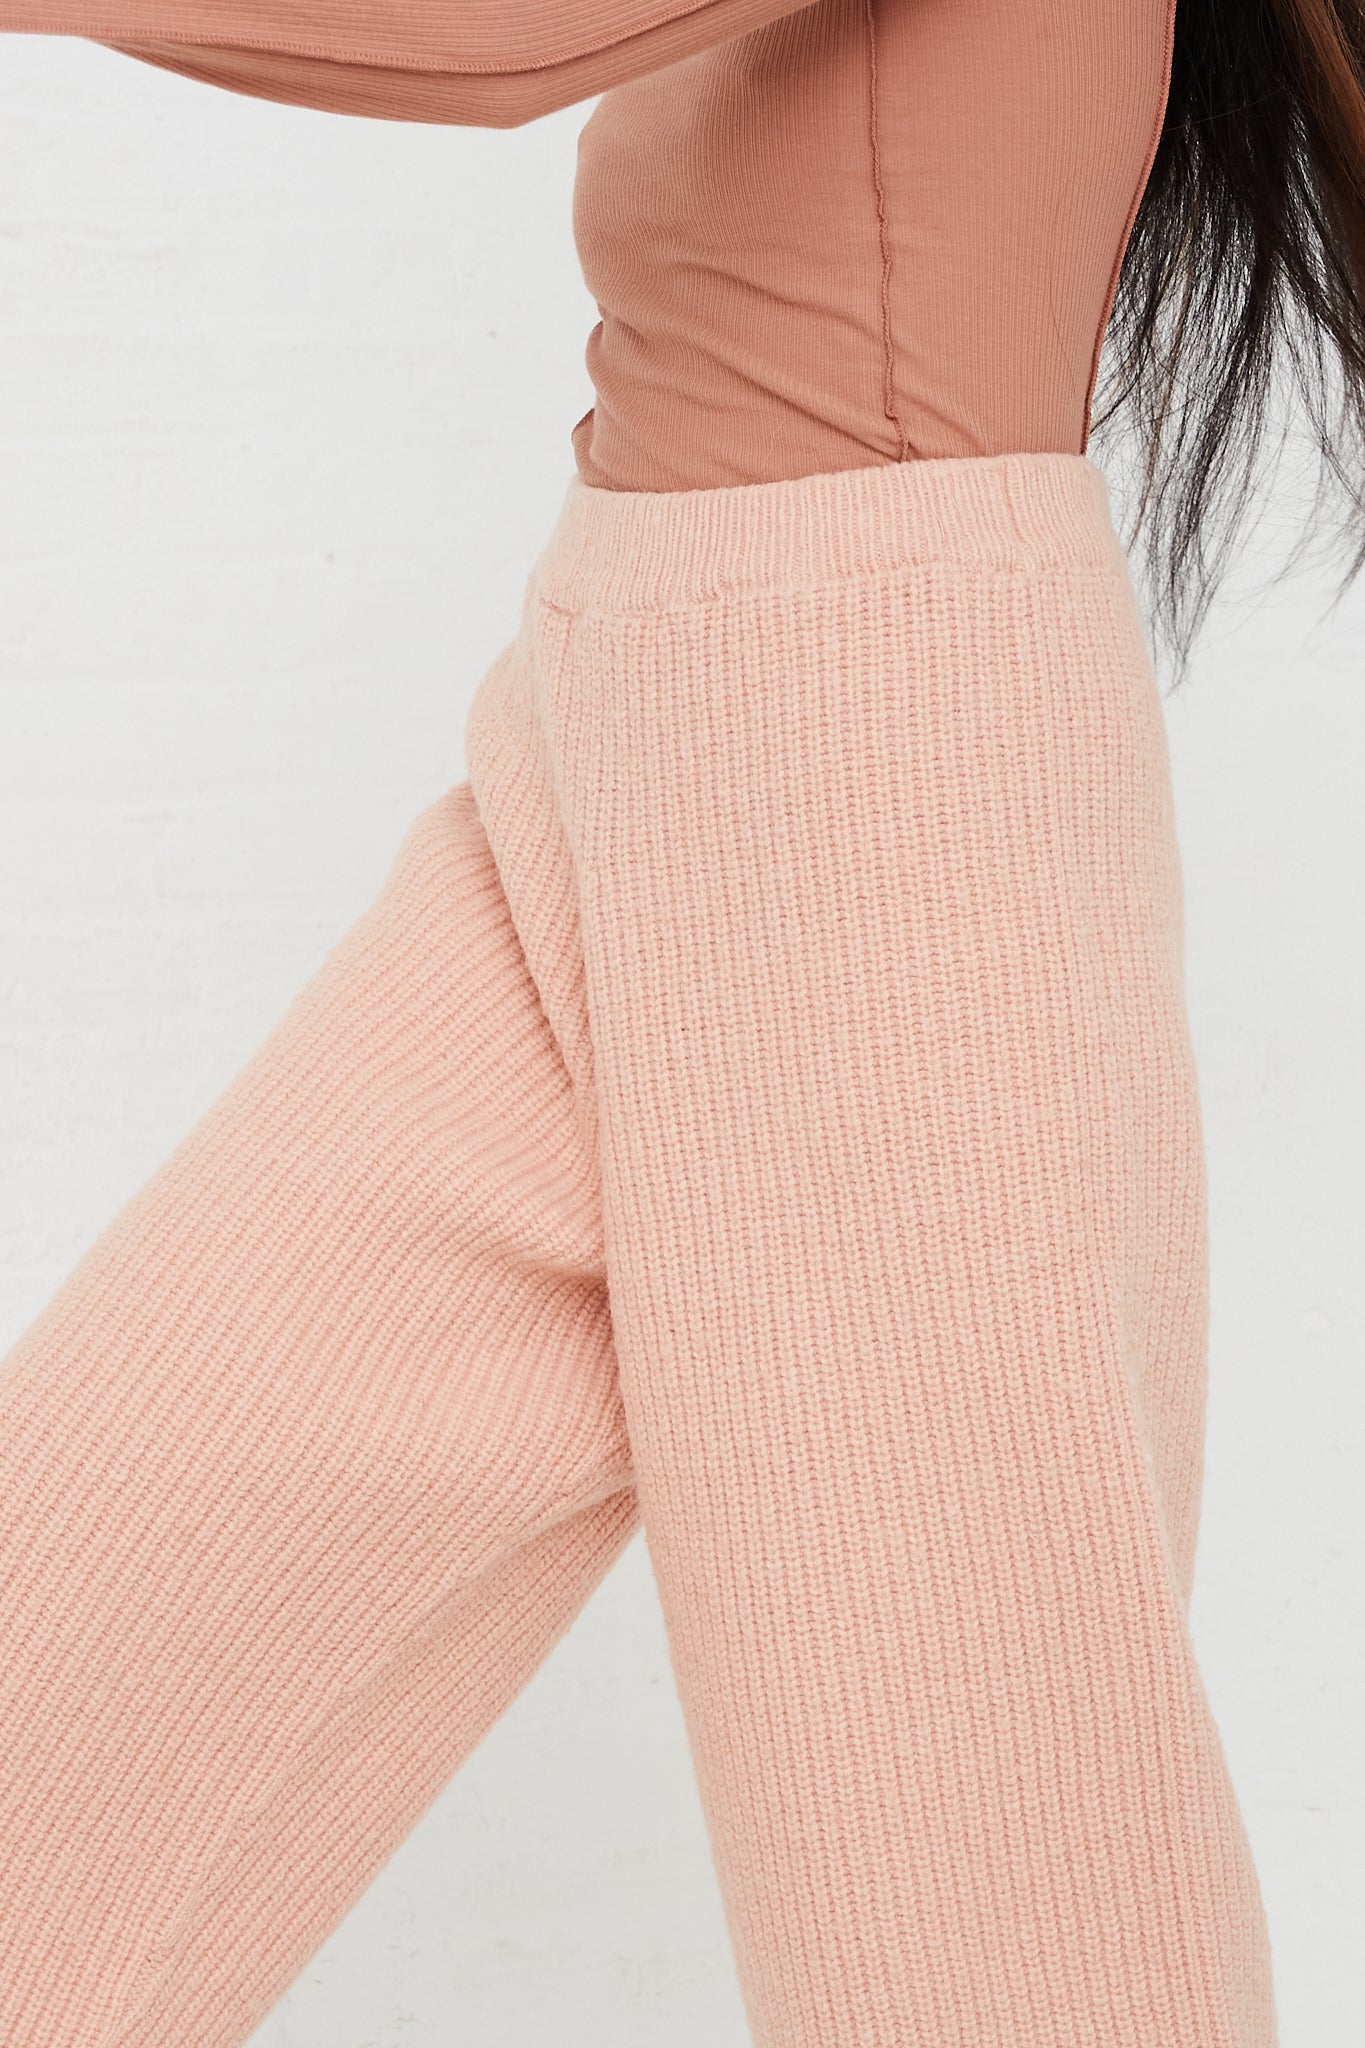 Mea Rib Knit Pant in Pink by Baserange for Oroboro Front Upclose